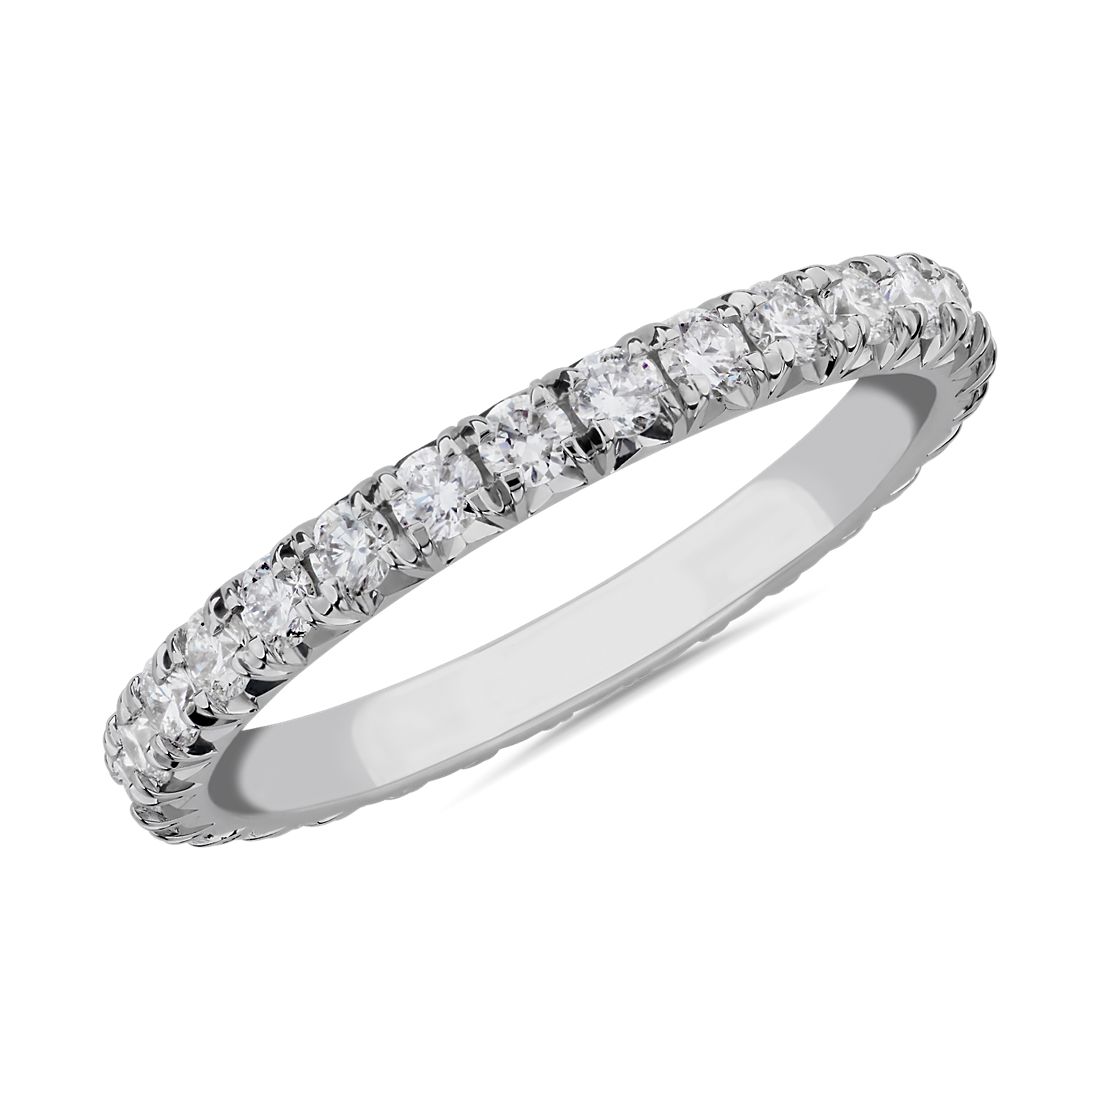 French Pave Diamond Eternity Band in Platinum (0.62 ct. tw.)